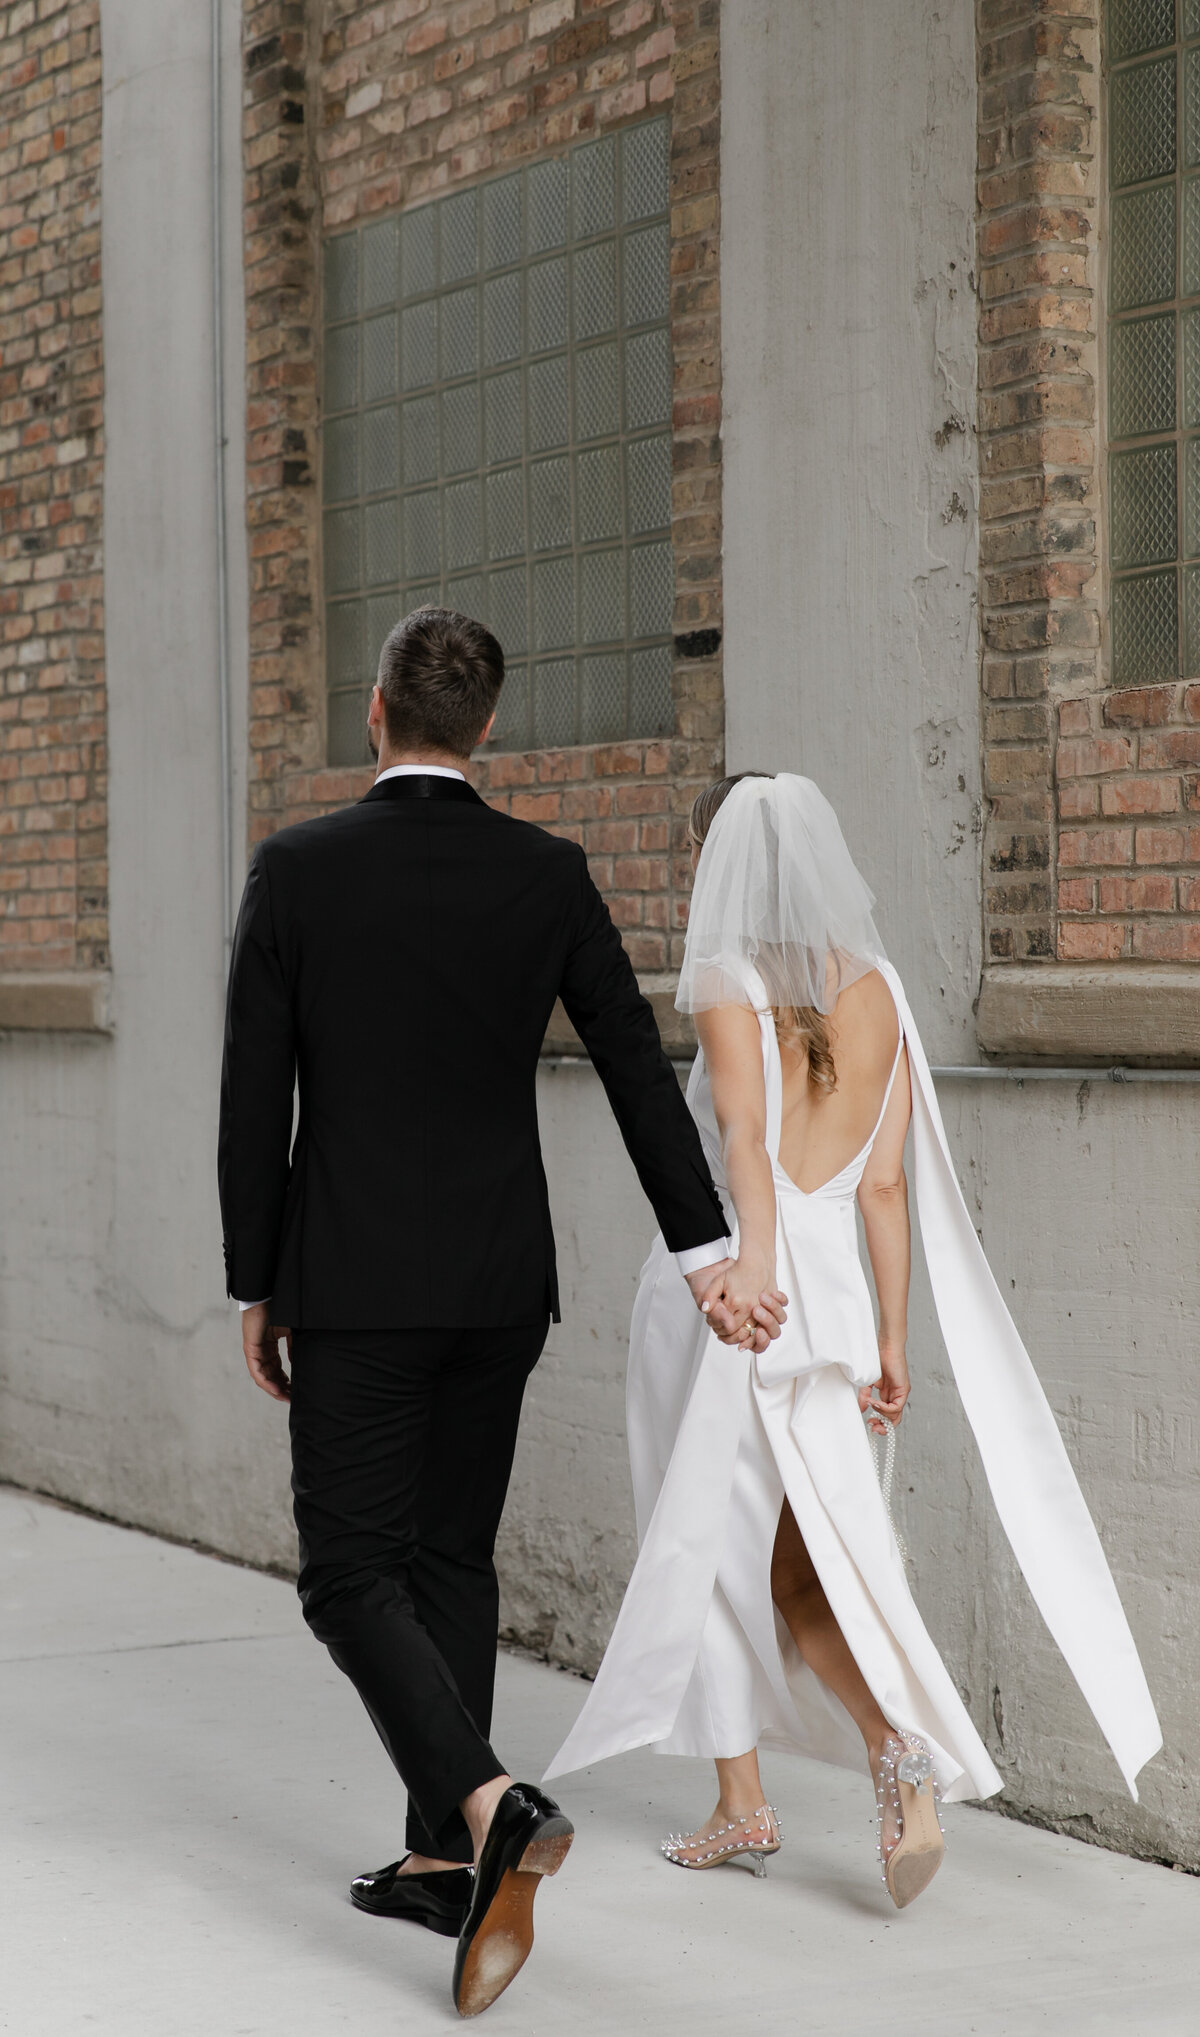 Bride in elegant low-back gown holds hands with groom as they are pictured from behind outdoors at Chicago wedding ceremony.